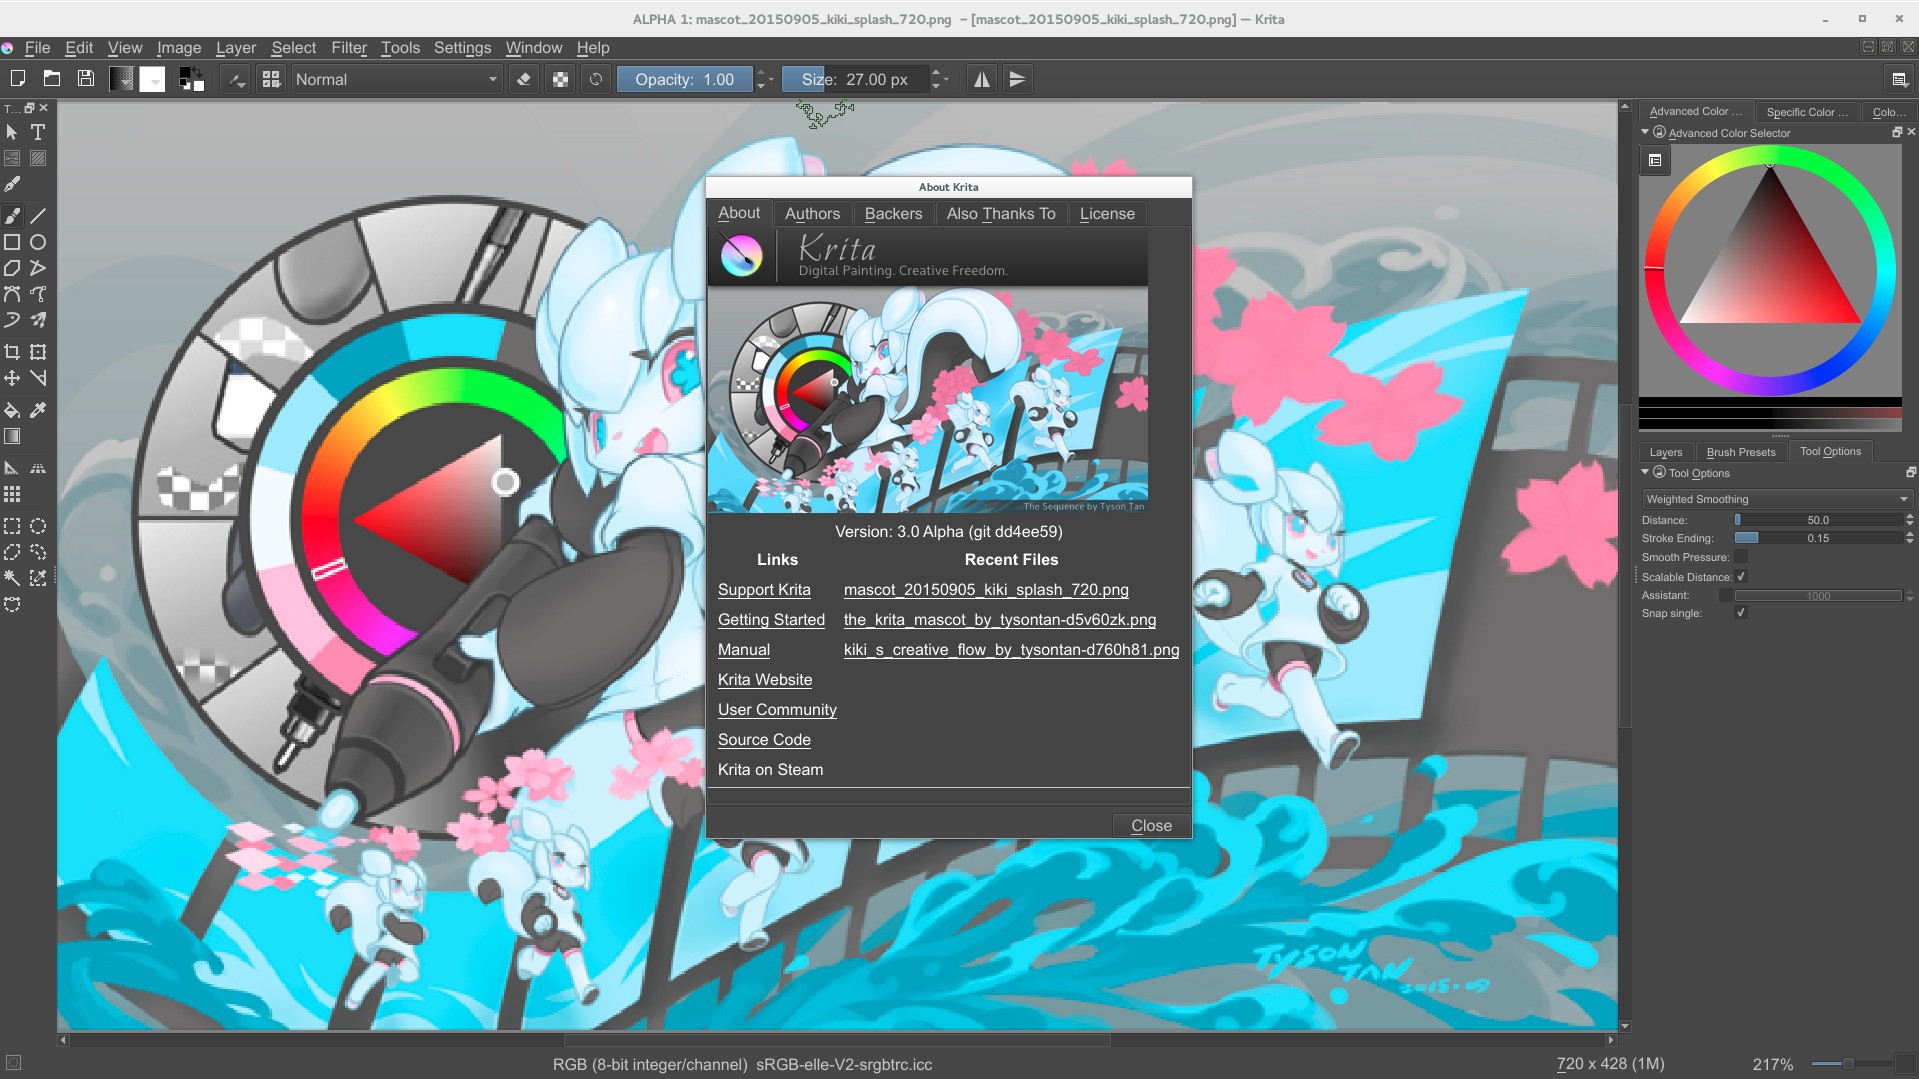 Krita Port to KDE Frameworks 5 and Qt 5 Almost Done, Krita 3.0 Coming Later...